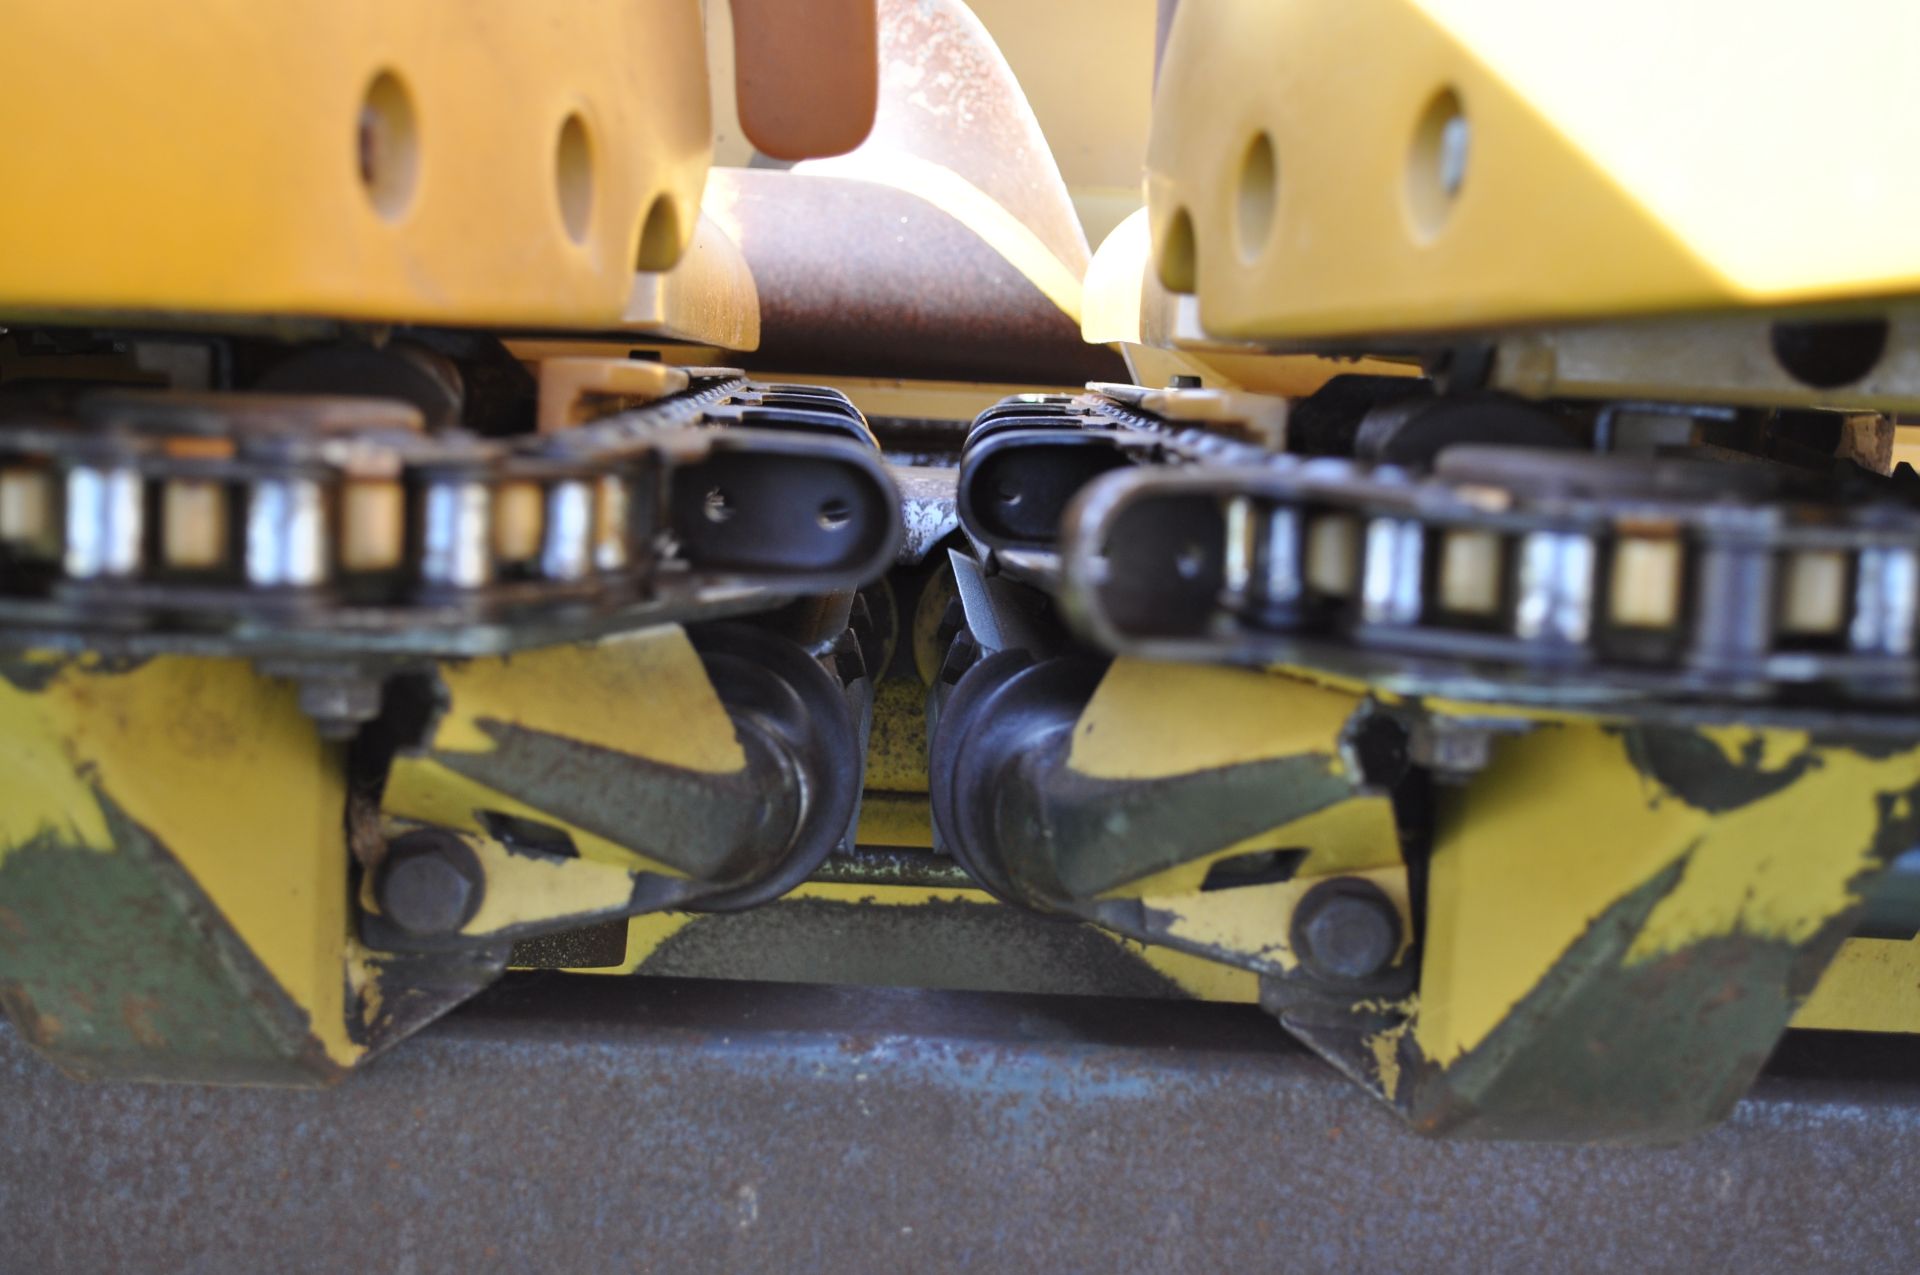 Lexion Model C508 corn head, 30”/8-row, hyd deck plates, poly snouts - Image 21 of 33